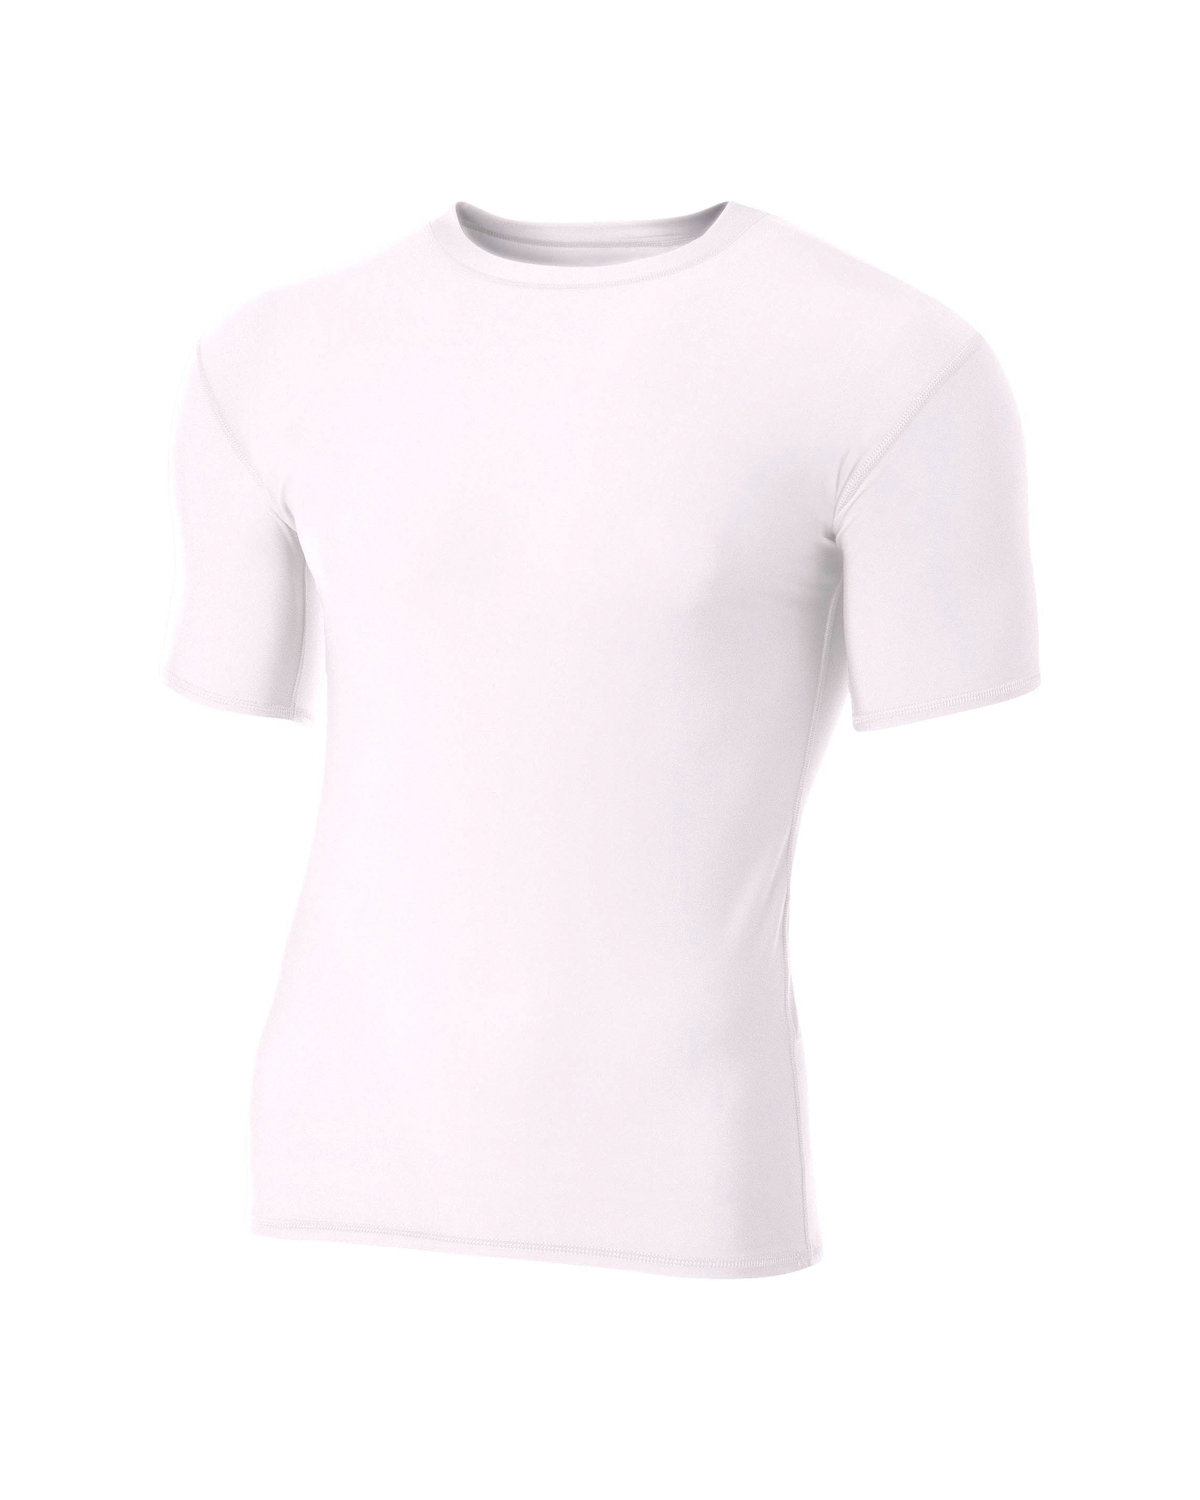 Adult Polyester Spandex Short Sleeve Compression T-Shirt-A4